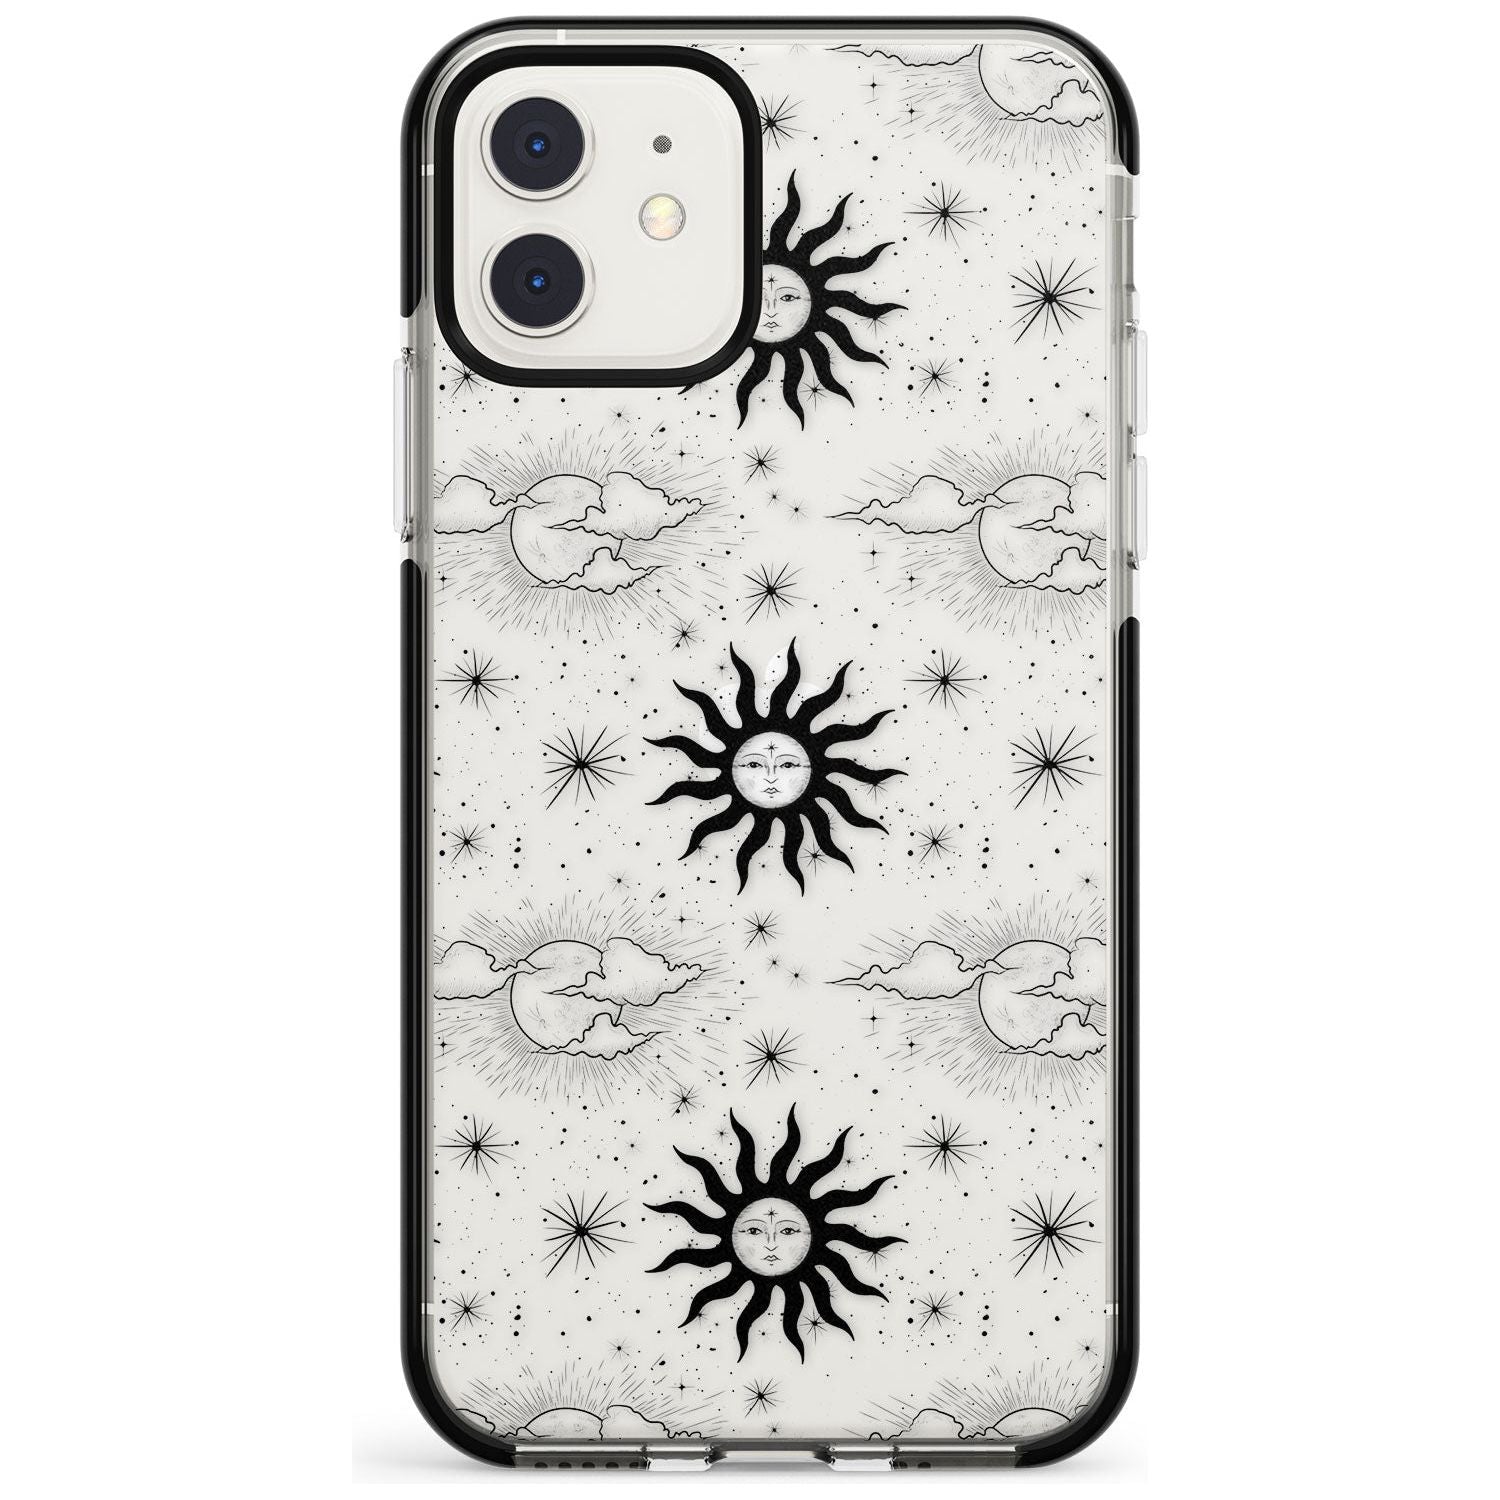 Suns & Clouds Vintage Astrological Black Impact Phone Case for iPhone 11